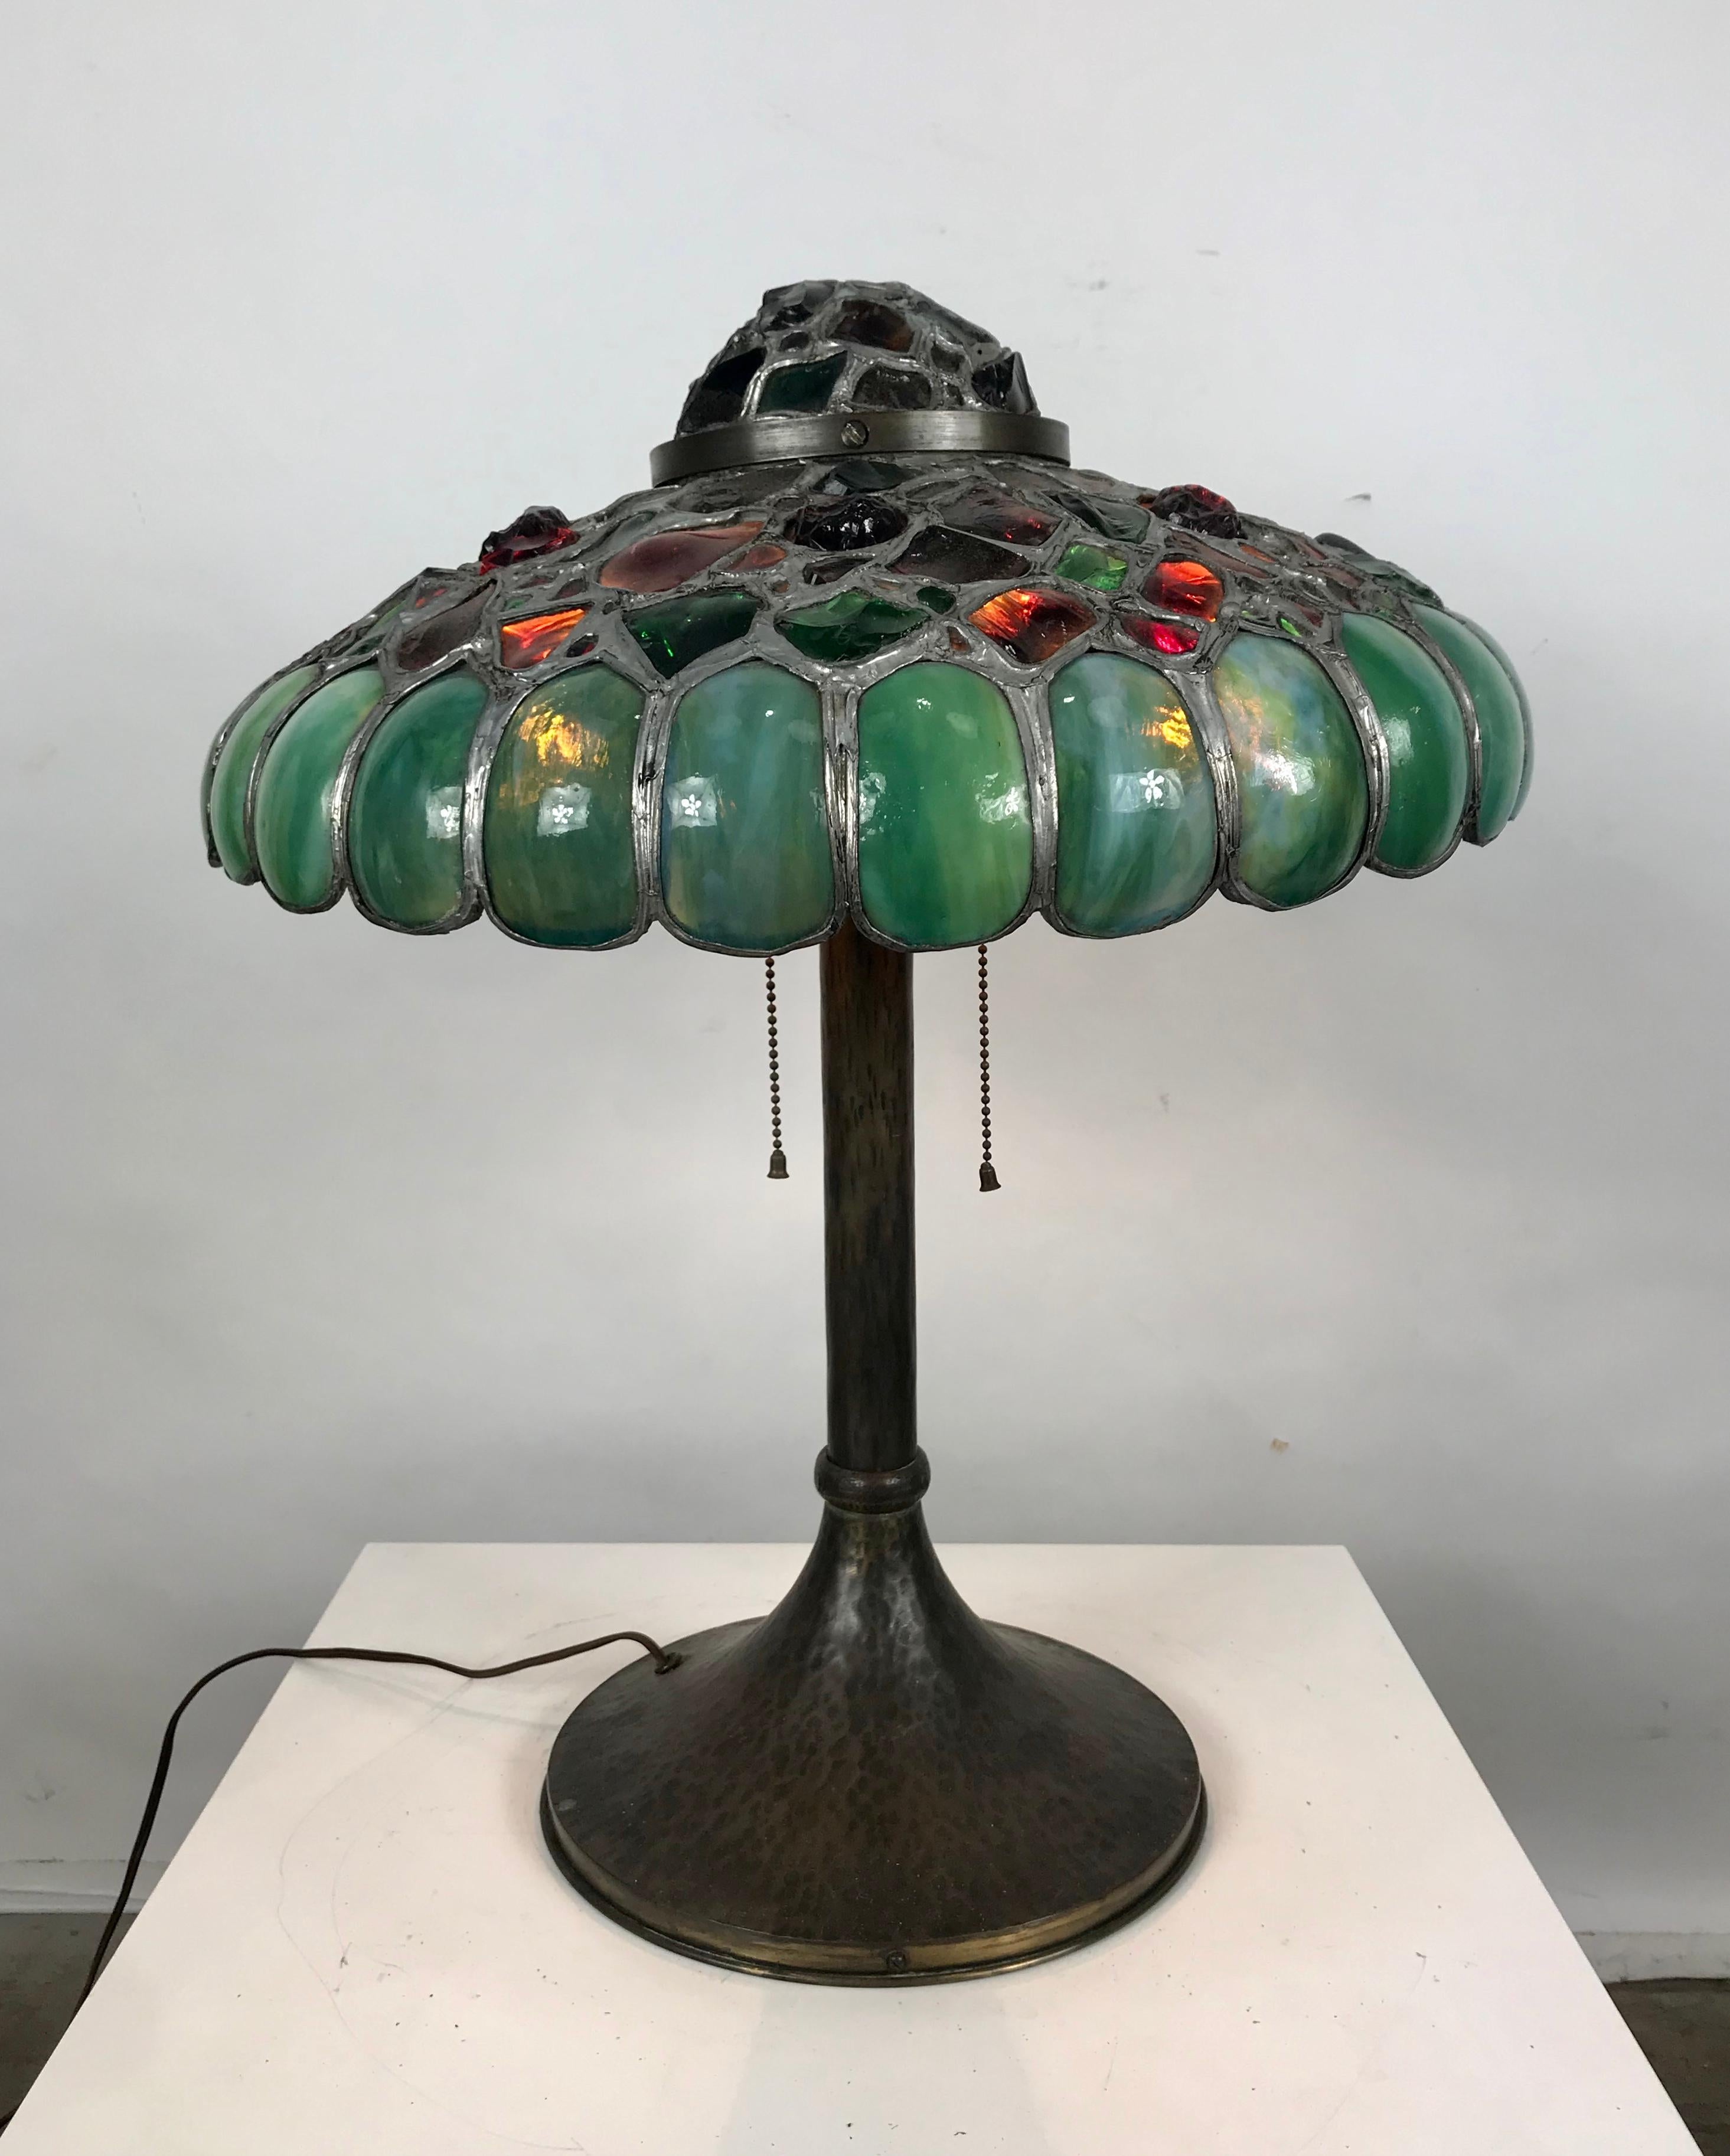 Austrian bronze and chunk jewel, slag glass table lamp. This incredibly colorful lamp is one of the more exotic examples of this style table lamp. The jewels are all handcut and light up with very vibrant colors. Classic form. Stunning example.